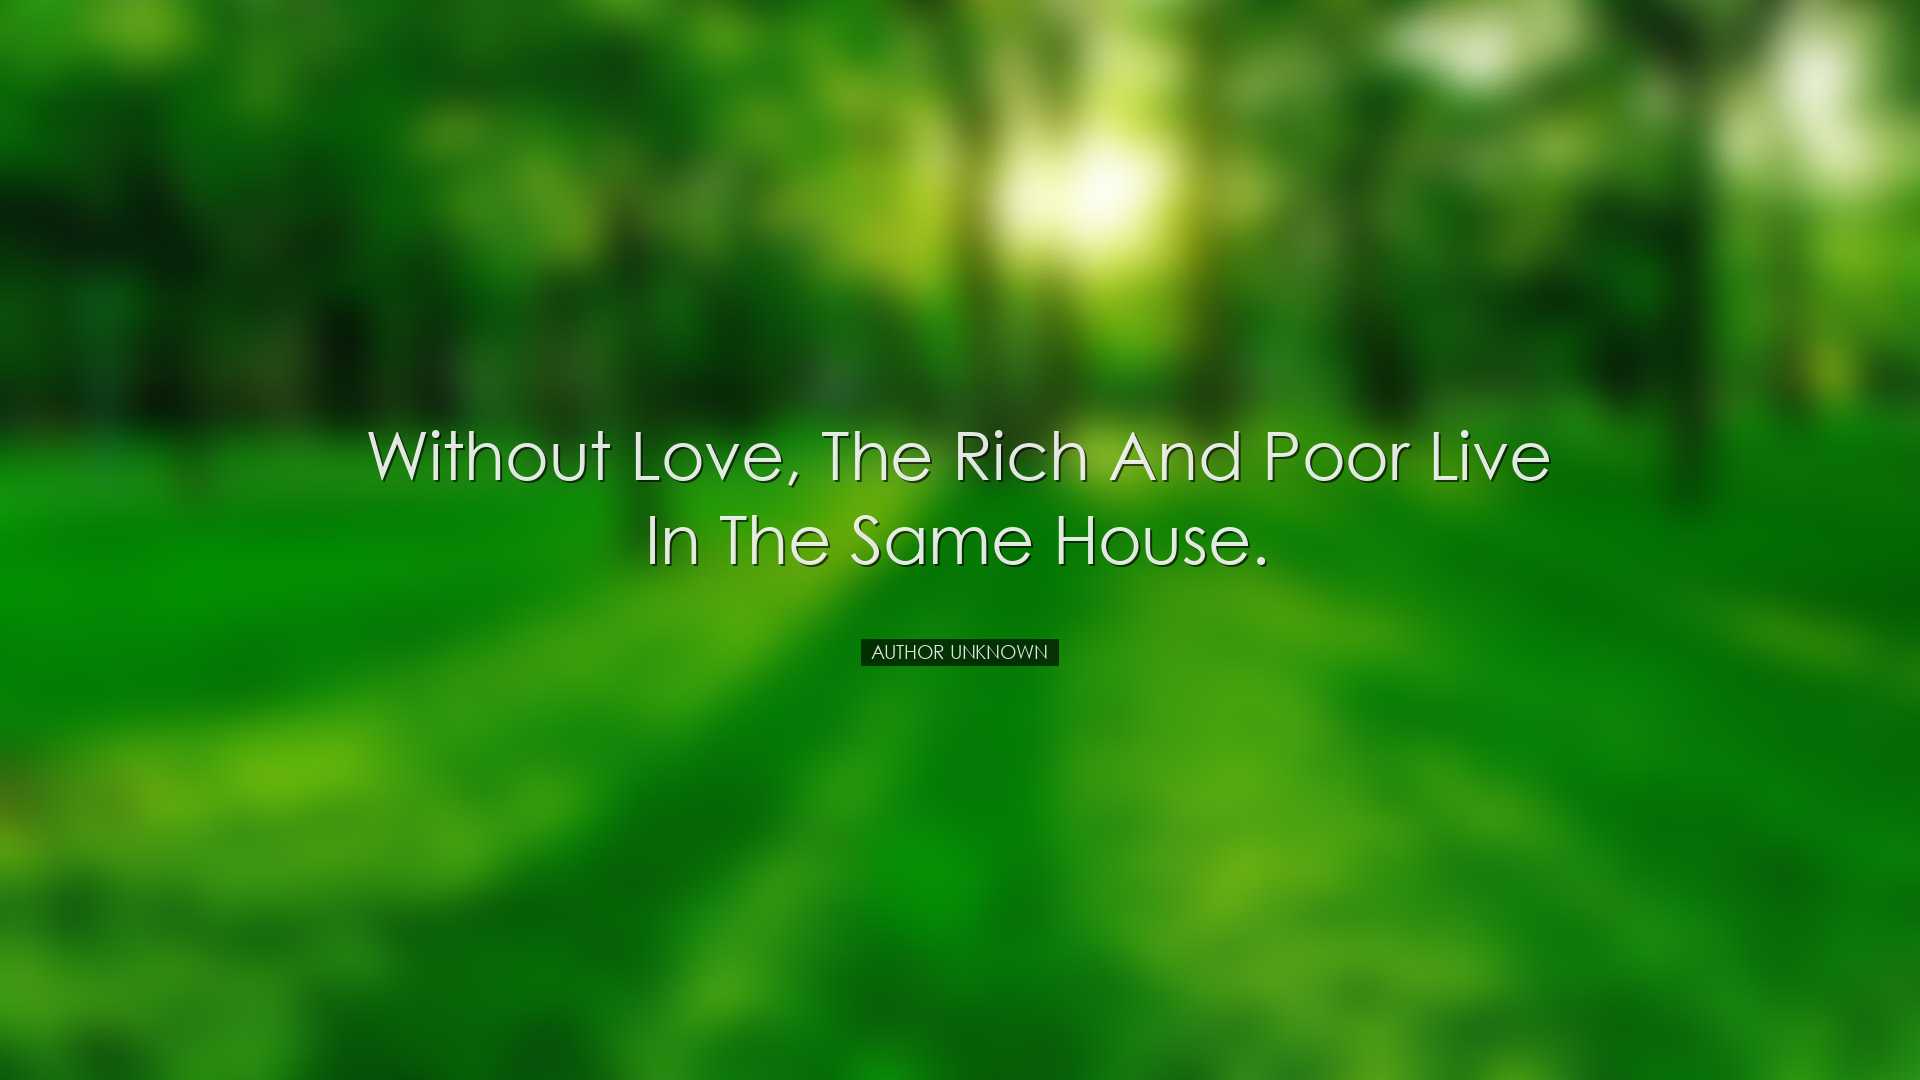 Without love, the rich and poor live in the same house. - Author U